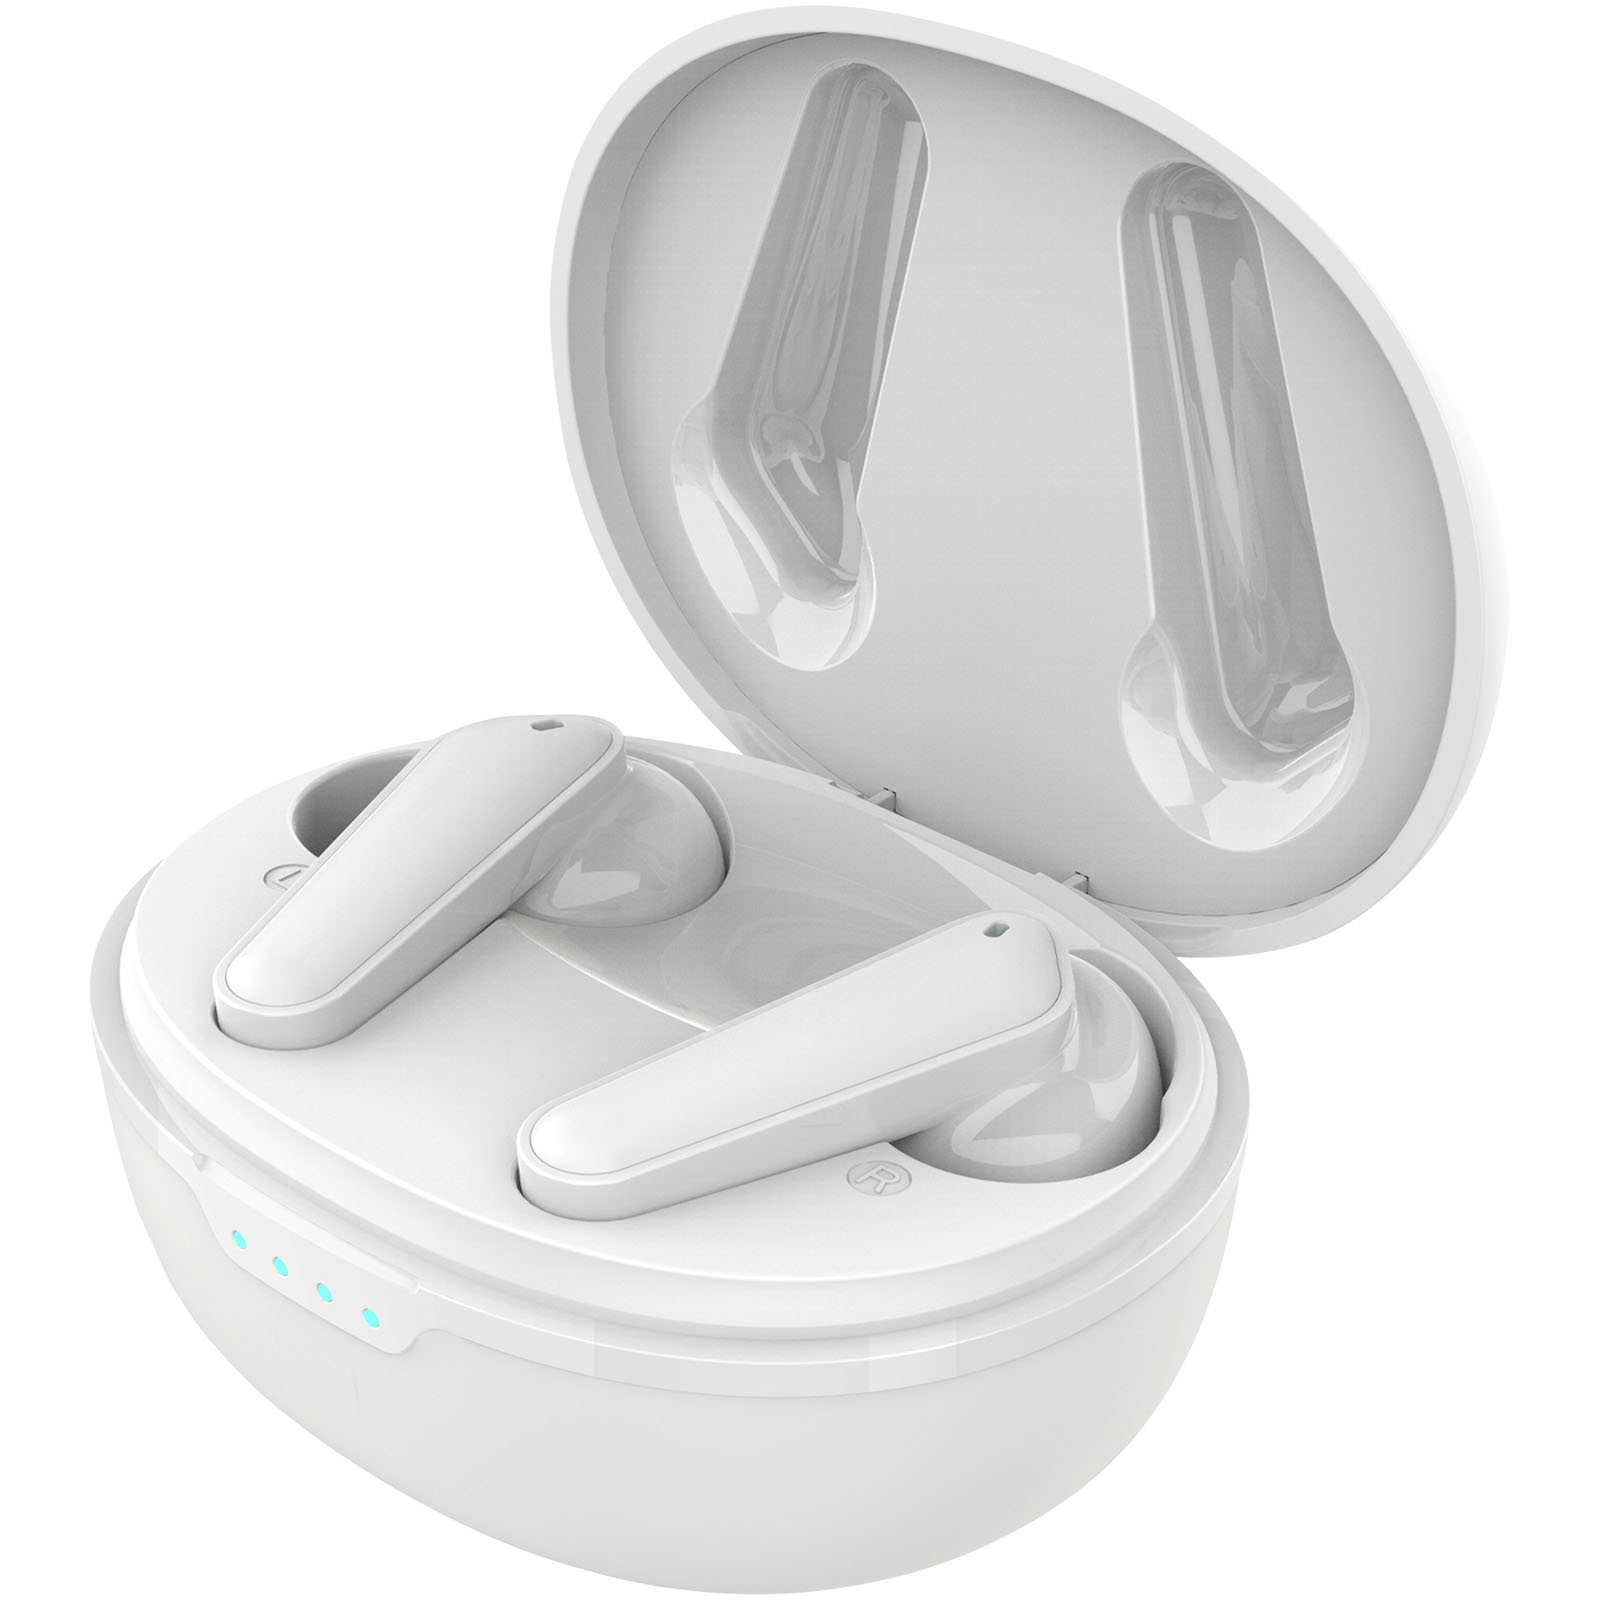 ClearSound earbuds - Barnard Castle